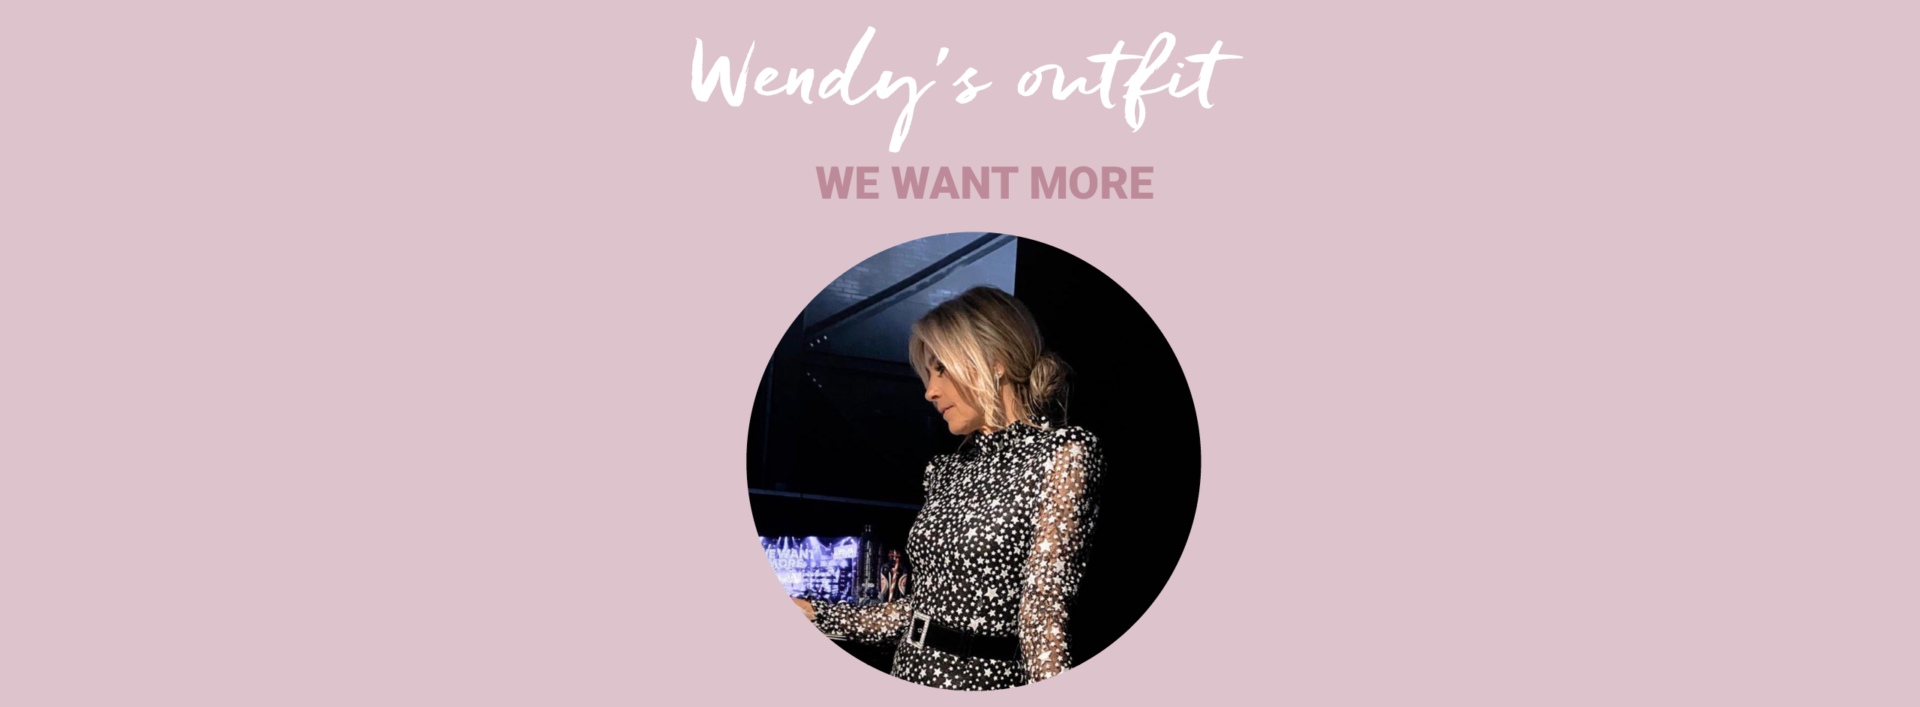 header wendys outfit Wendy's outfit - We Want More (seizoen 2 afl. 7)